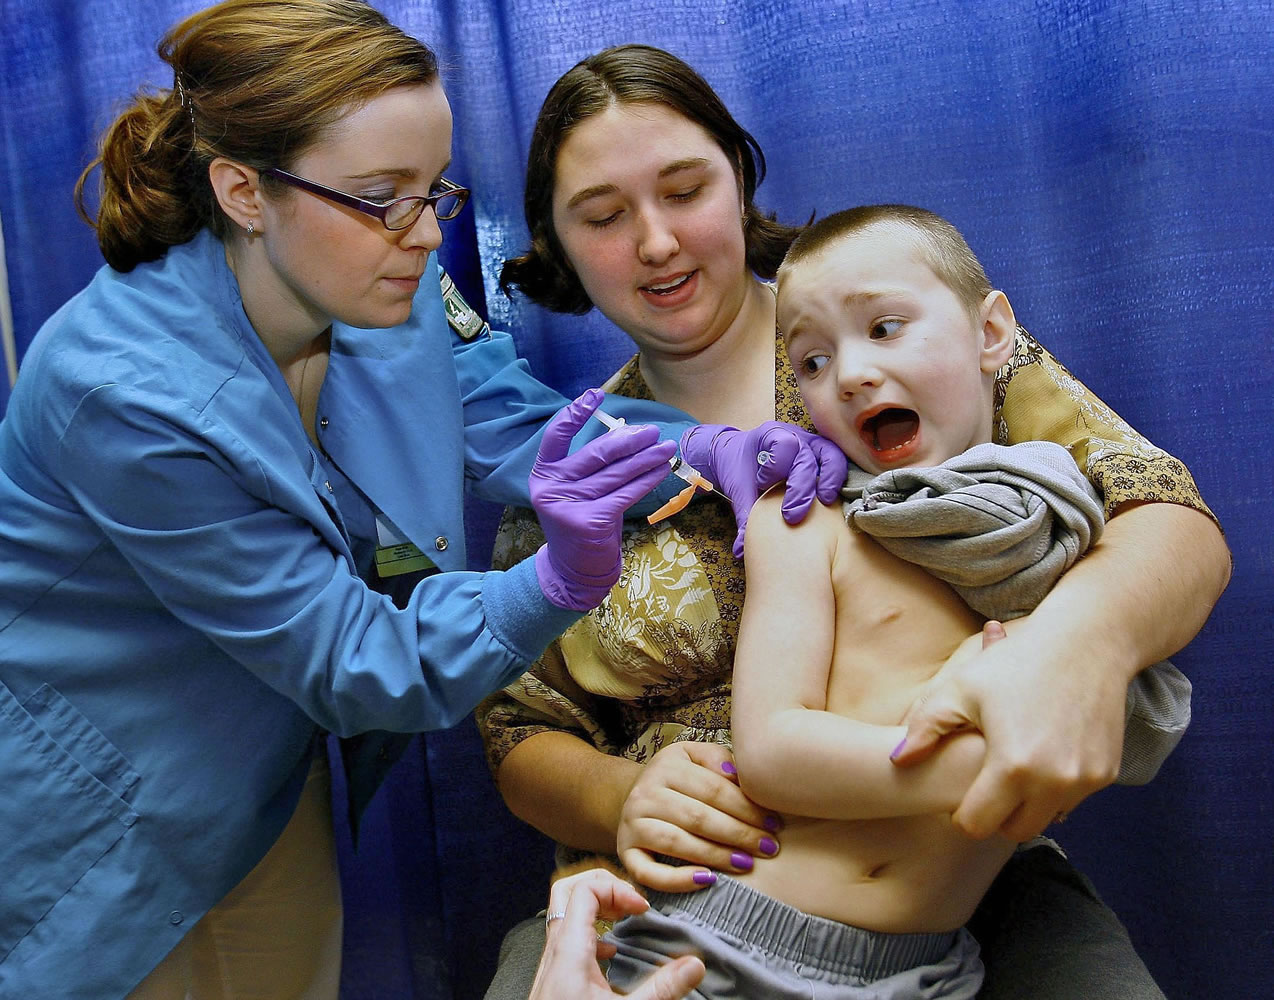 Anton Sheperd, 4, attempts a quick escape while his mother Tiffany Adkins holds him and nursing student Tiffany Stacy administers a shot at a February 2009 immunization clinic in Roseburg, Ore.